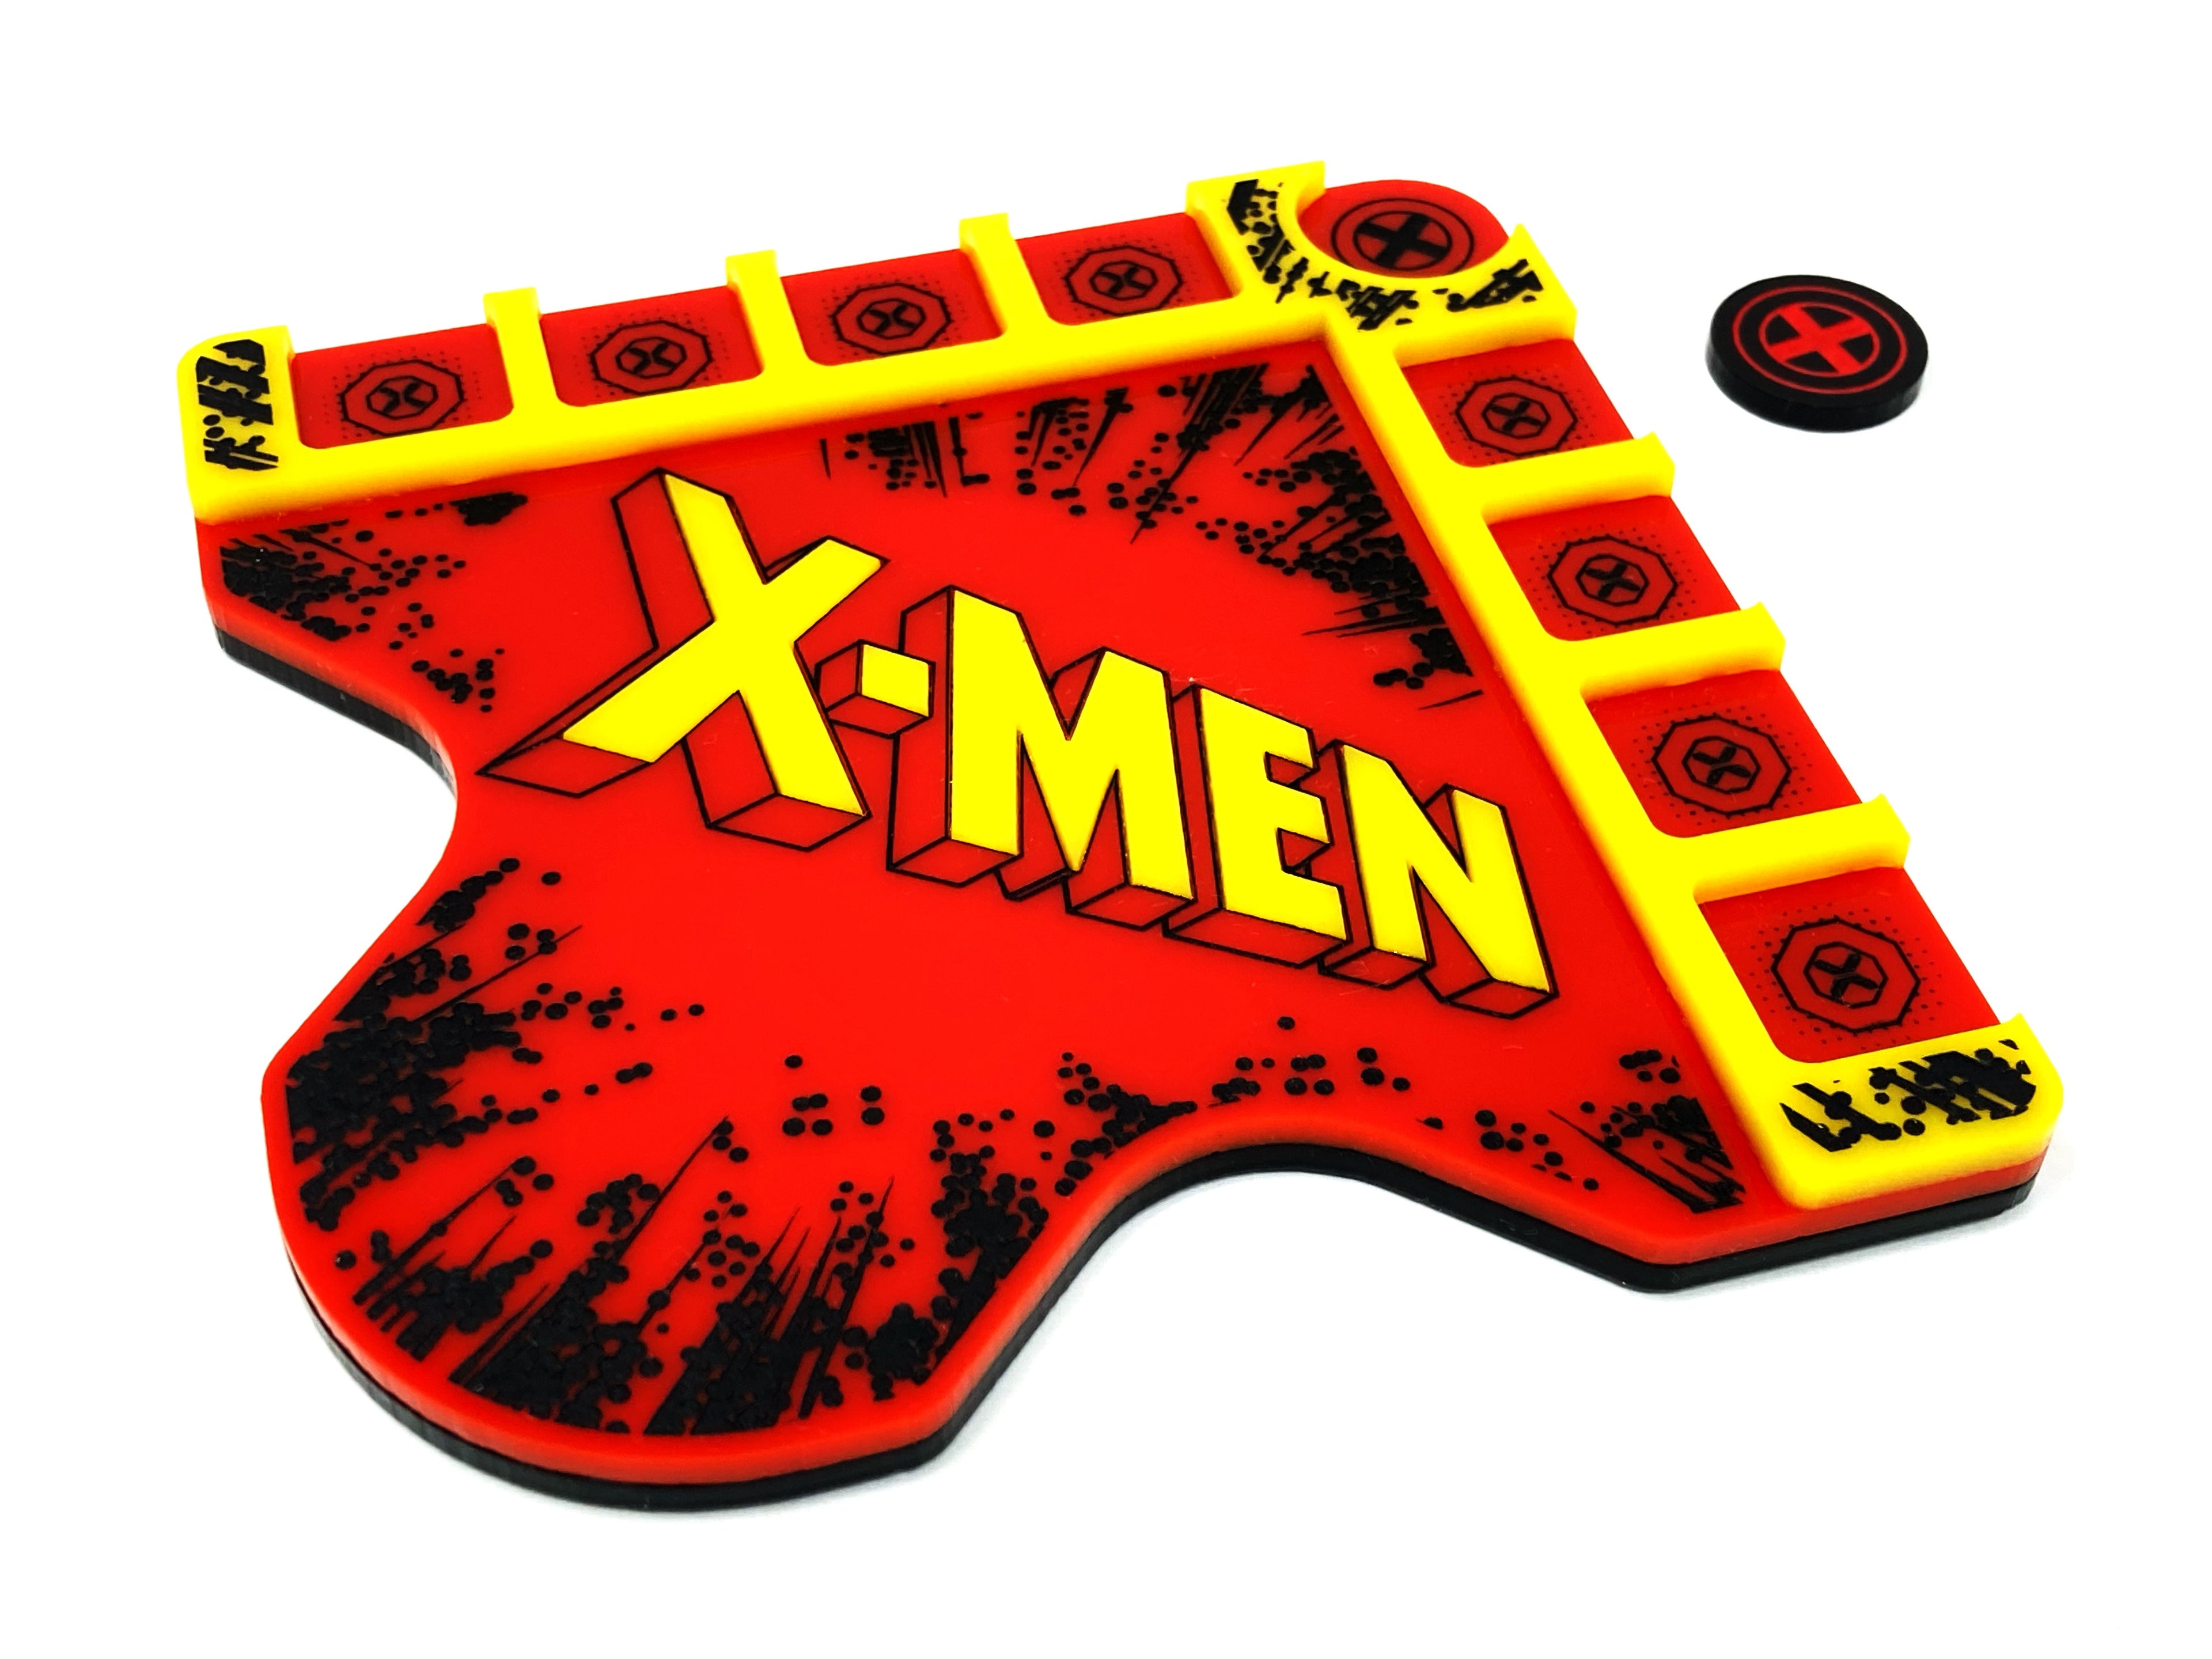 X-men Themed Hero board for Marvel Champions LCG compatible, (Tokens NOT Included)